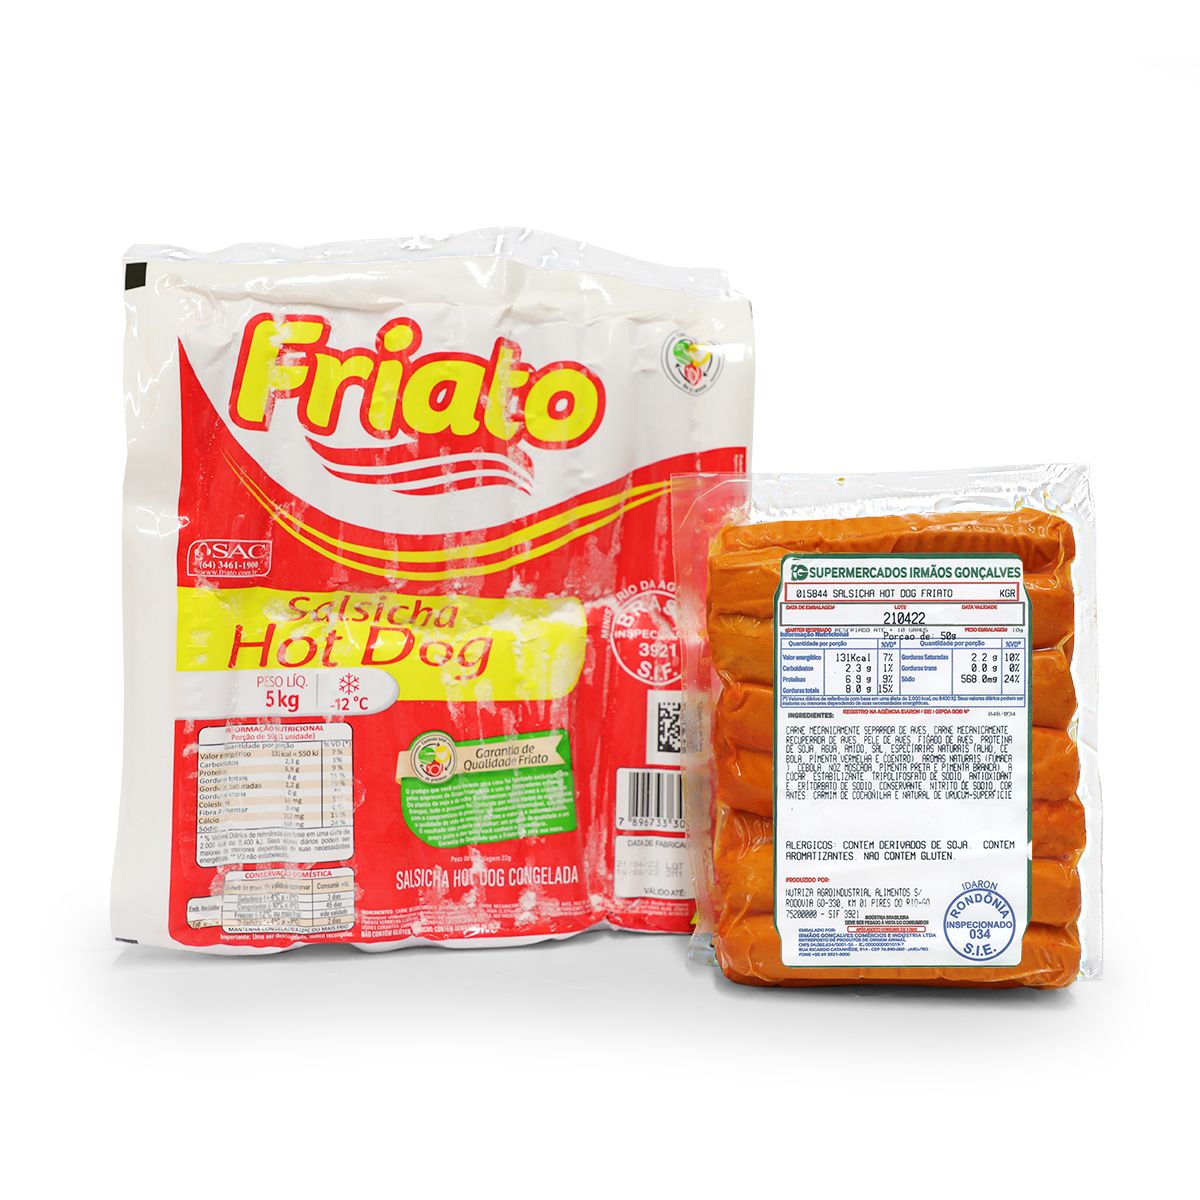 Salsicha Hot Dog Friato Aprox.790g image number 1